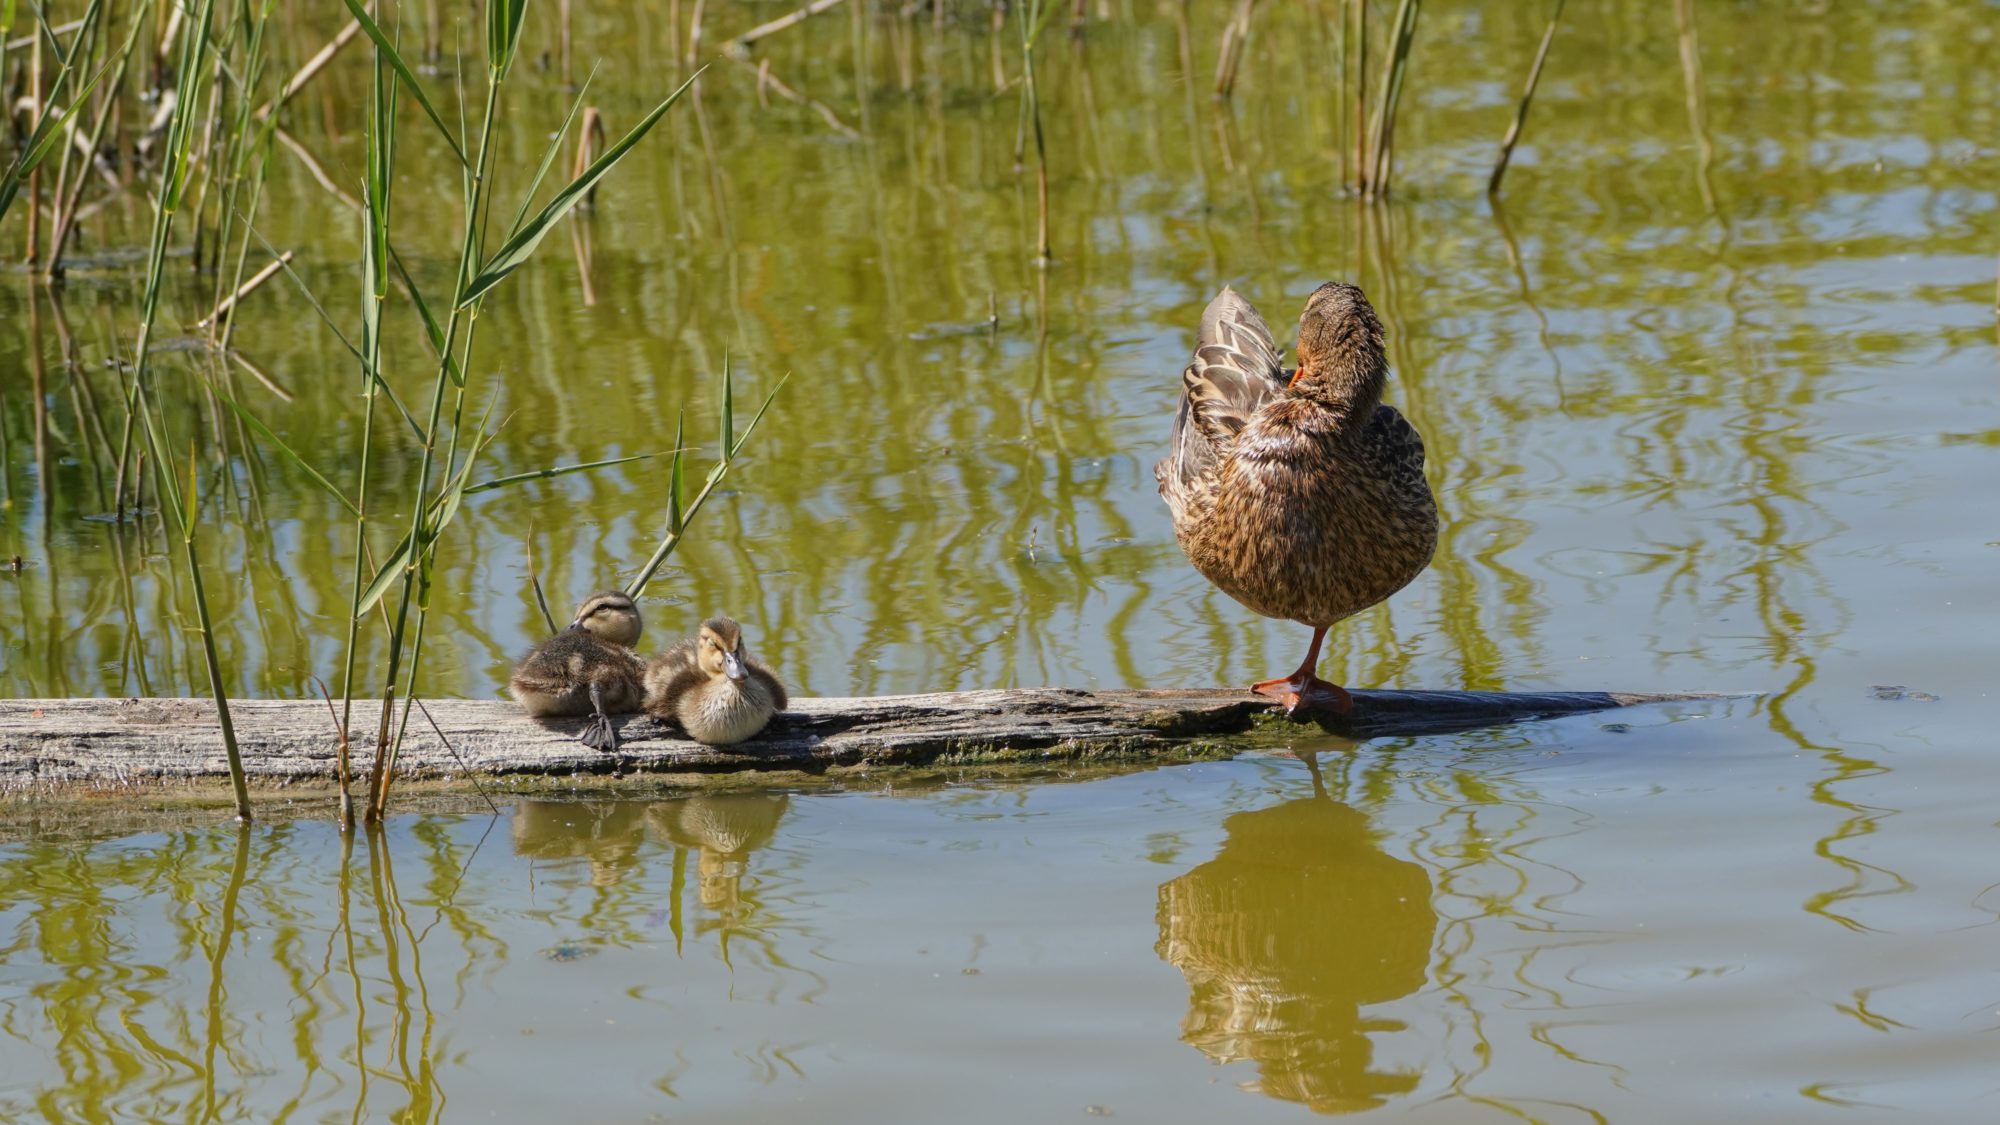 An adult female mallard napping on a log in the water; next to her are two ducklings huddled together